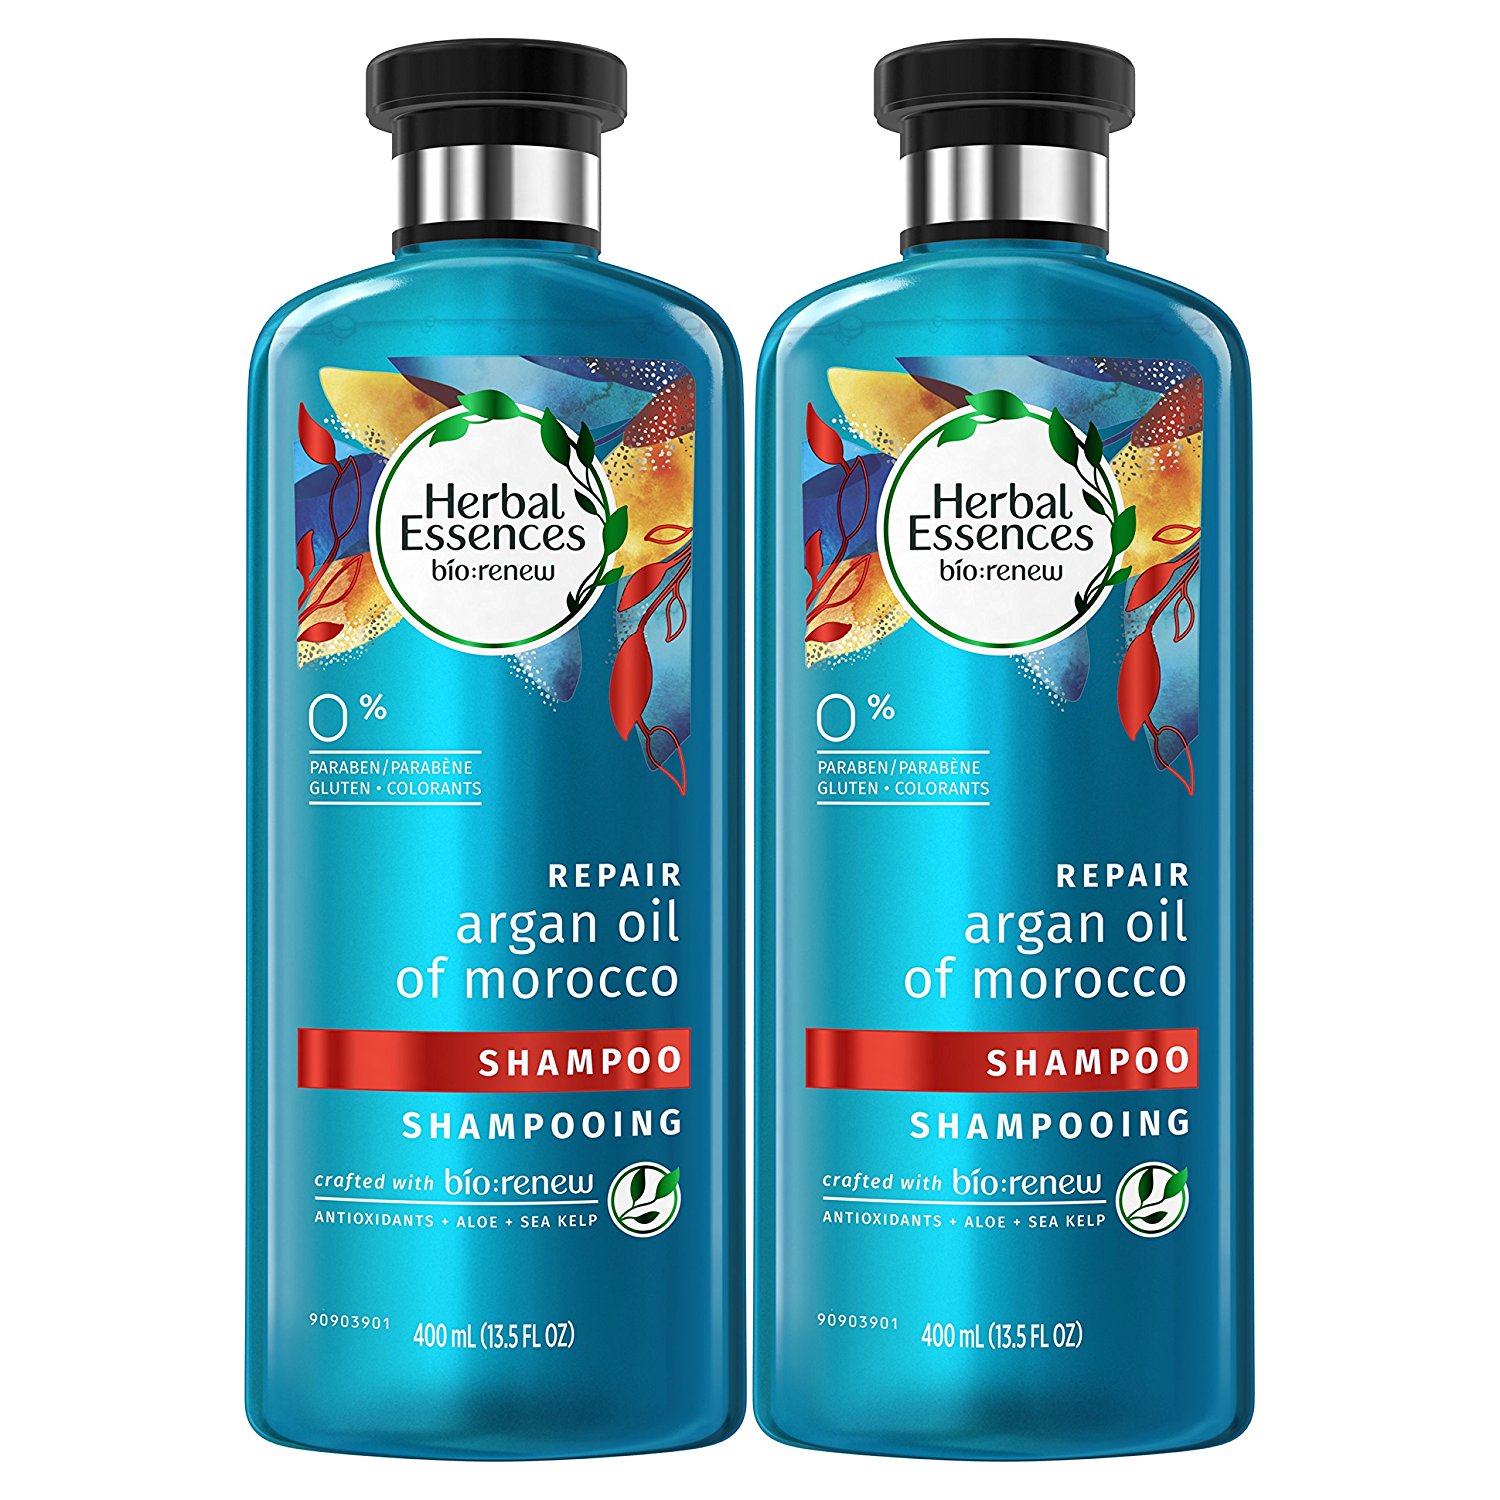 Prime members: Pack of two Herbal Essences 13.5 oz shampoo or conditioner for $6